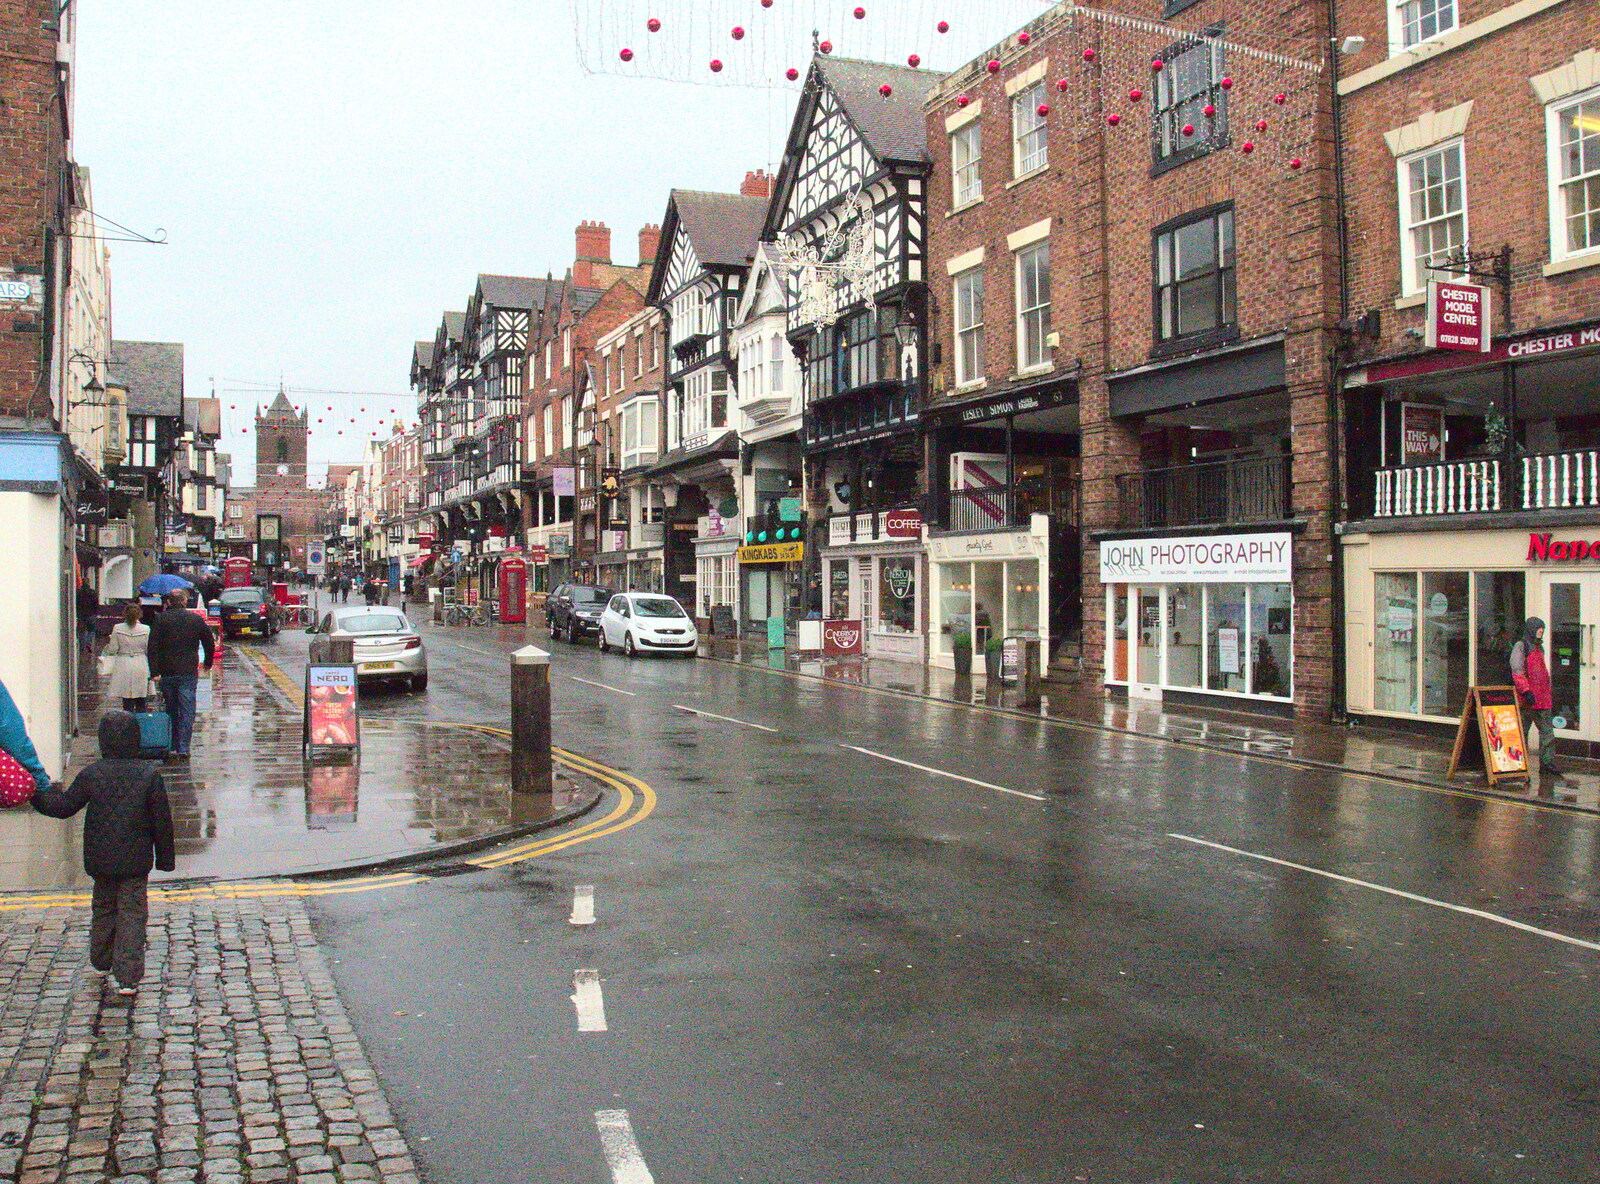 Grosvenor Street in Chester from A Party and a Road Trip to Chester, Suffolk and Cheshire - 20th December 2015